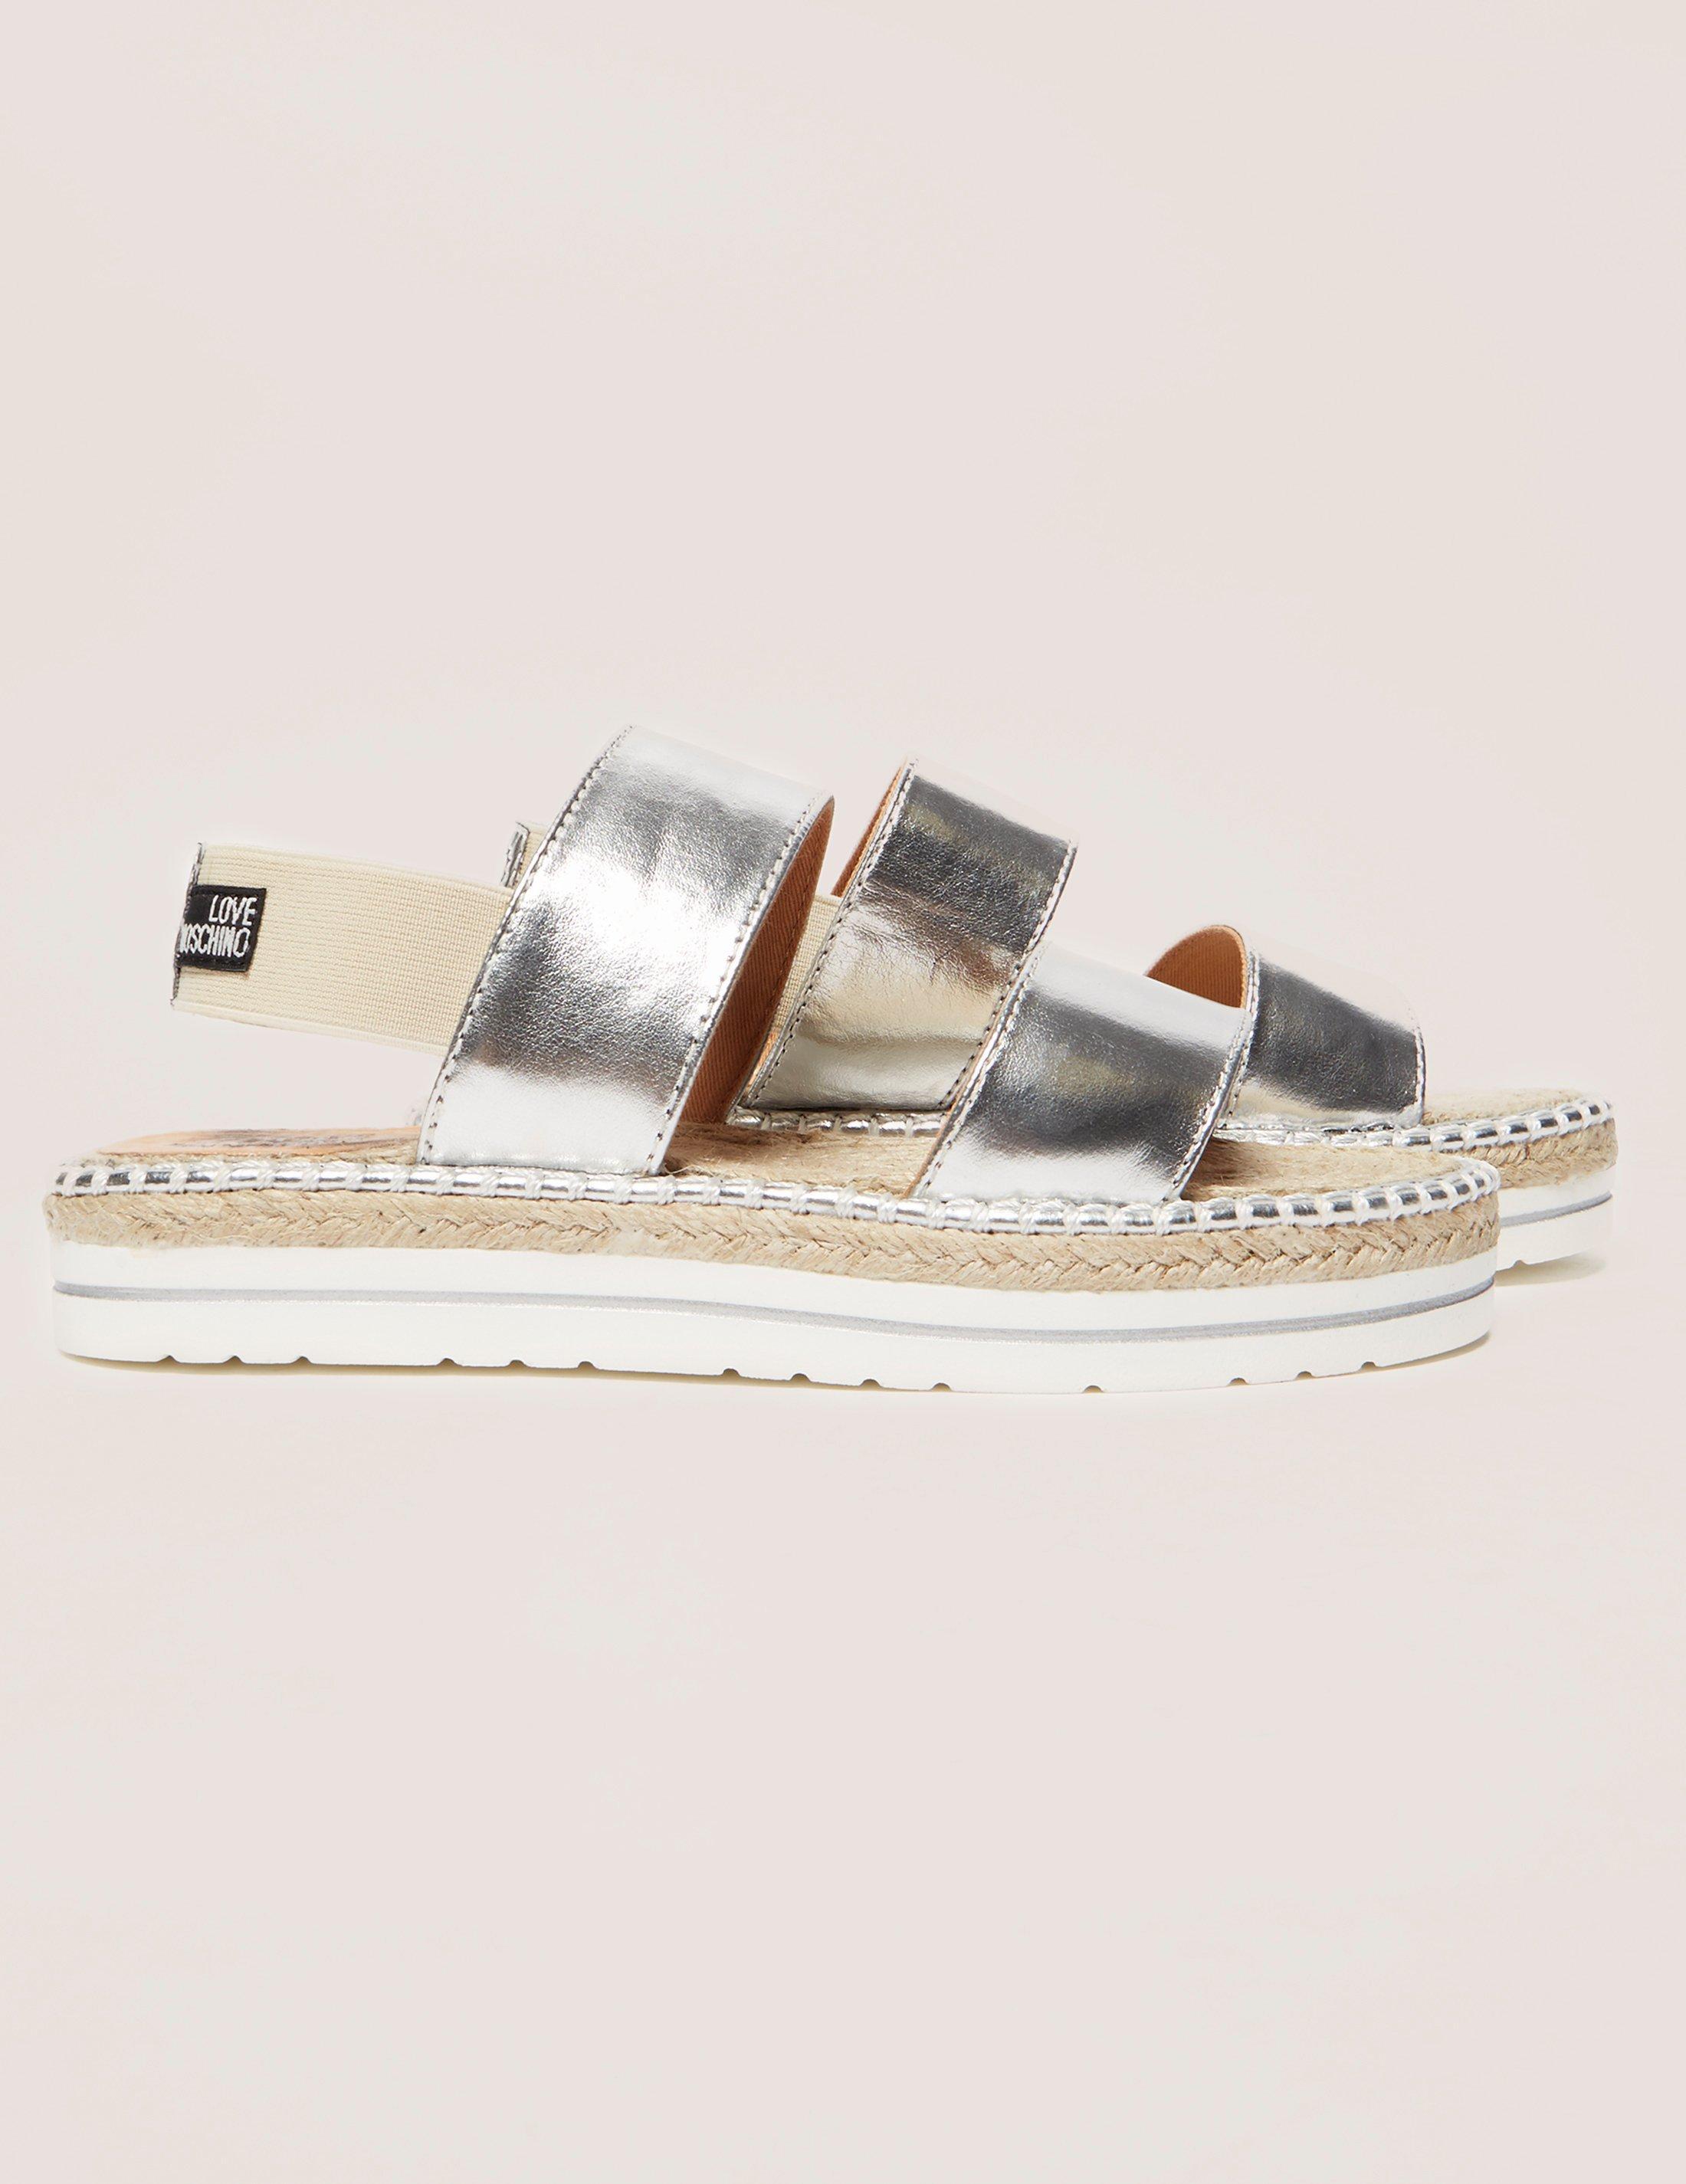 Love Moschino Double Strap Sandals in Silver (Metallic) | Lyst